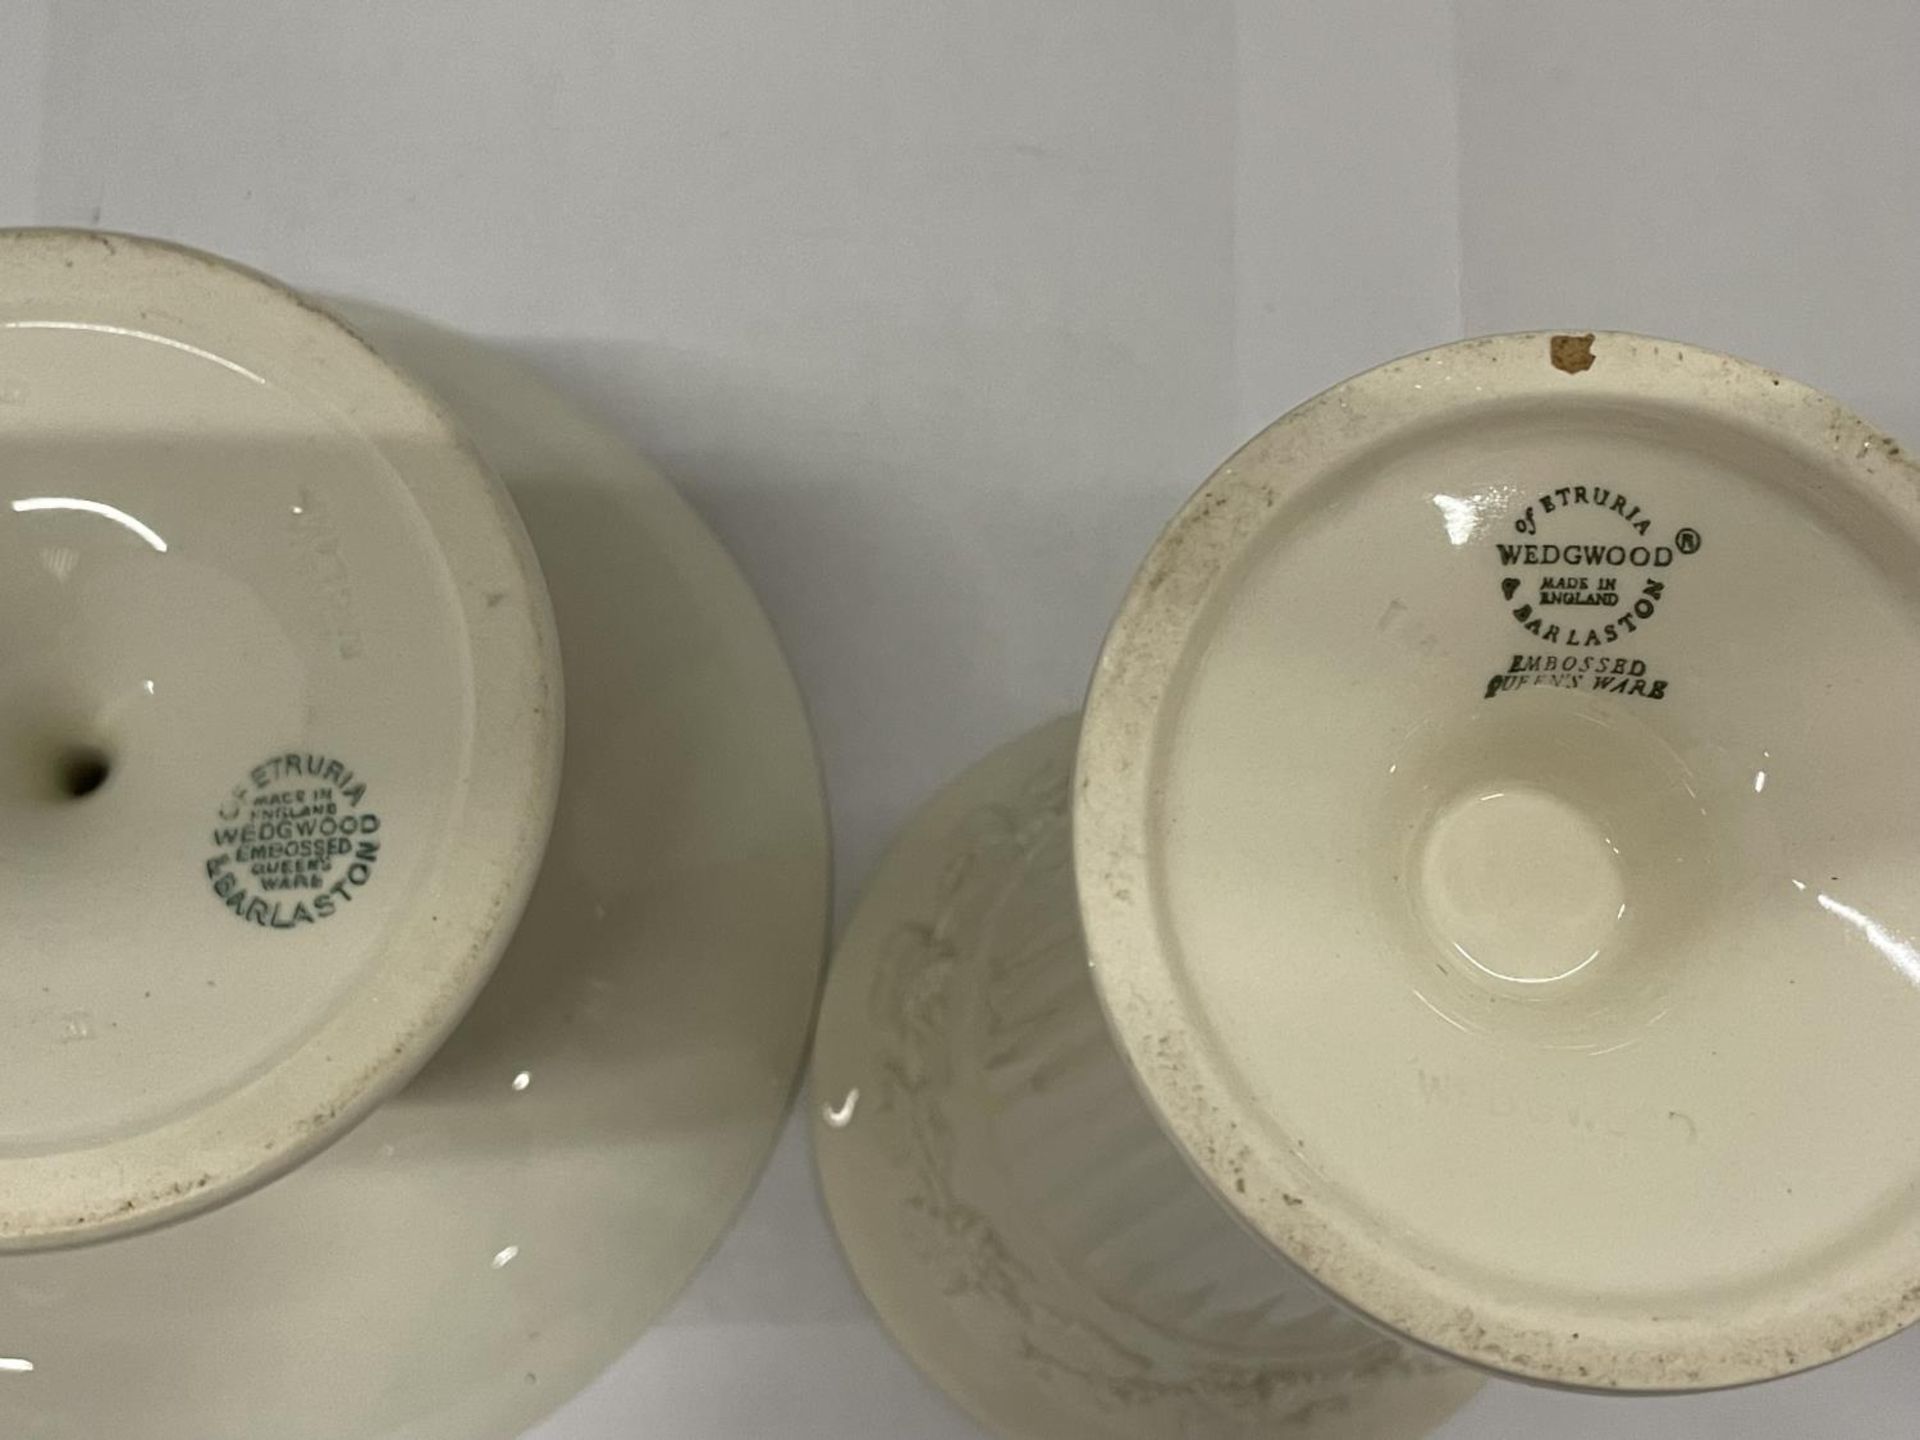 TWO PIECES OF WEDGWOOD EMBOSSED 'QUEENS WARE' TO INCLUDE A VASE HEIGHT 17CM AND A CAKE PLATE - Image 2 of 2